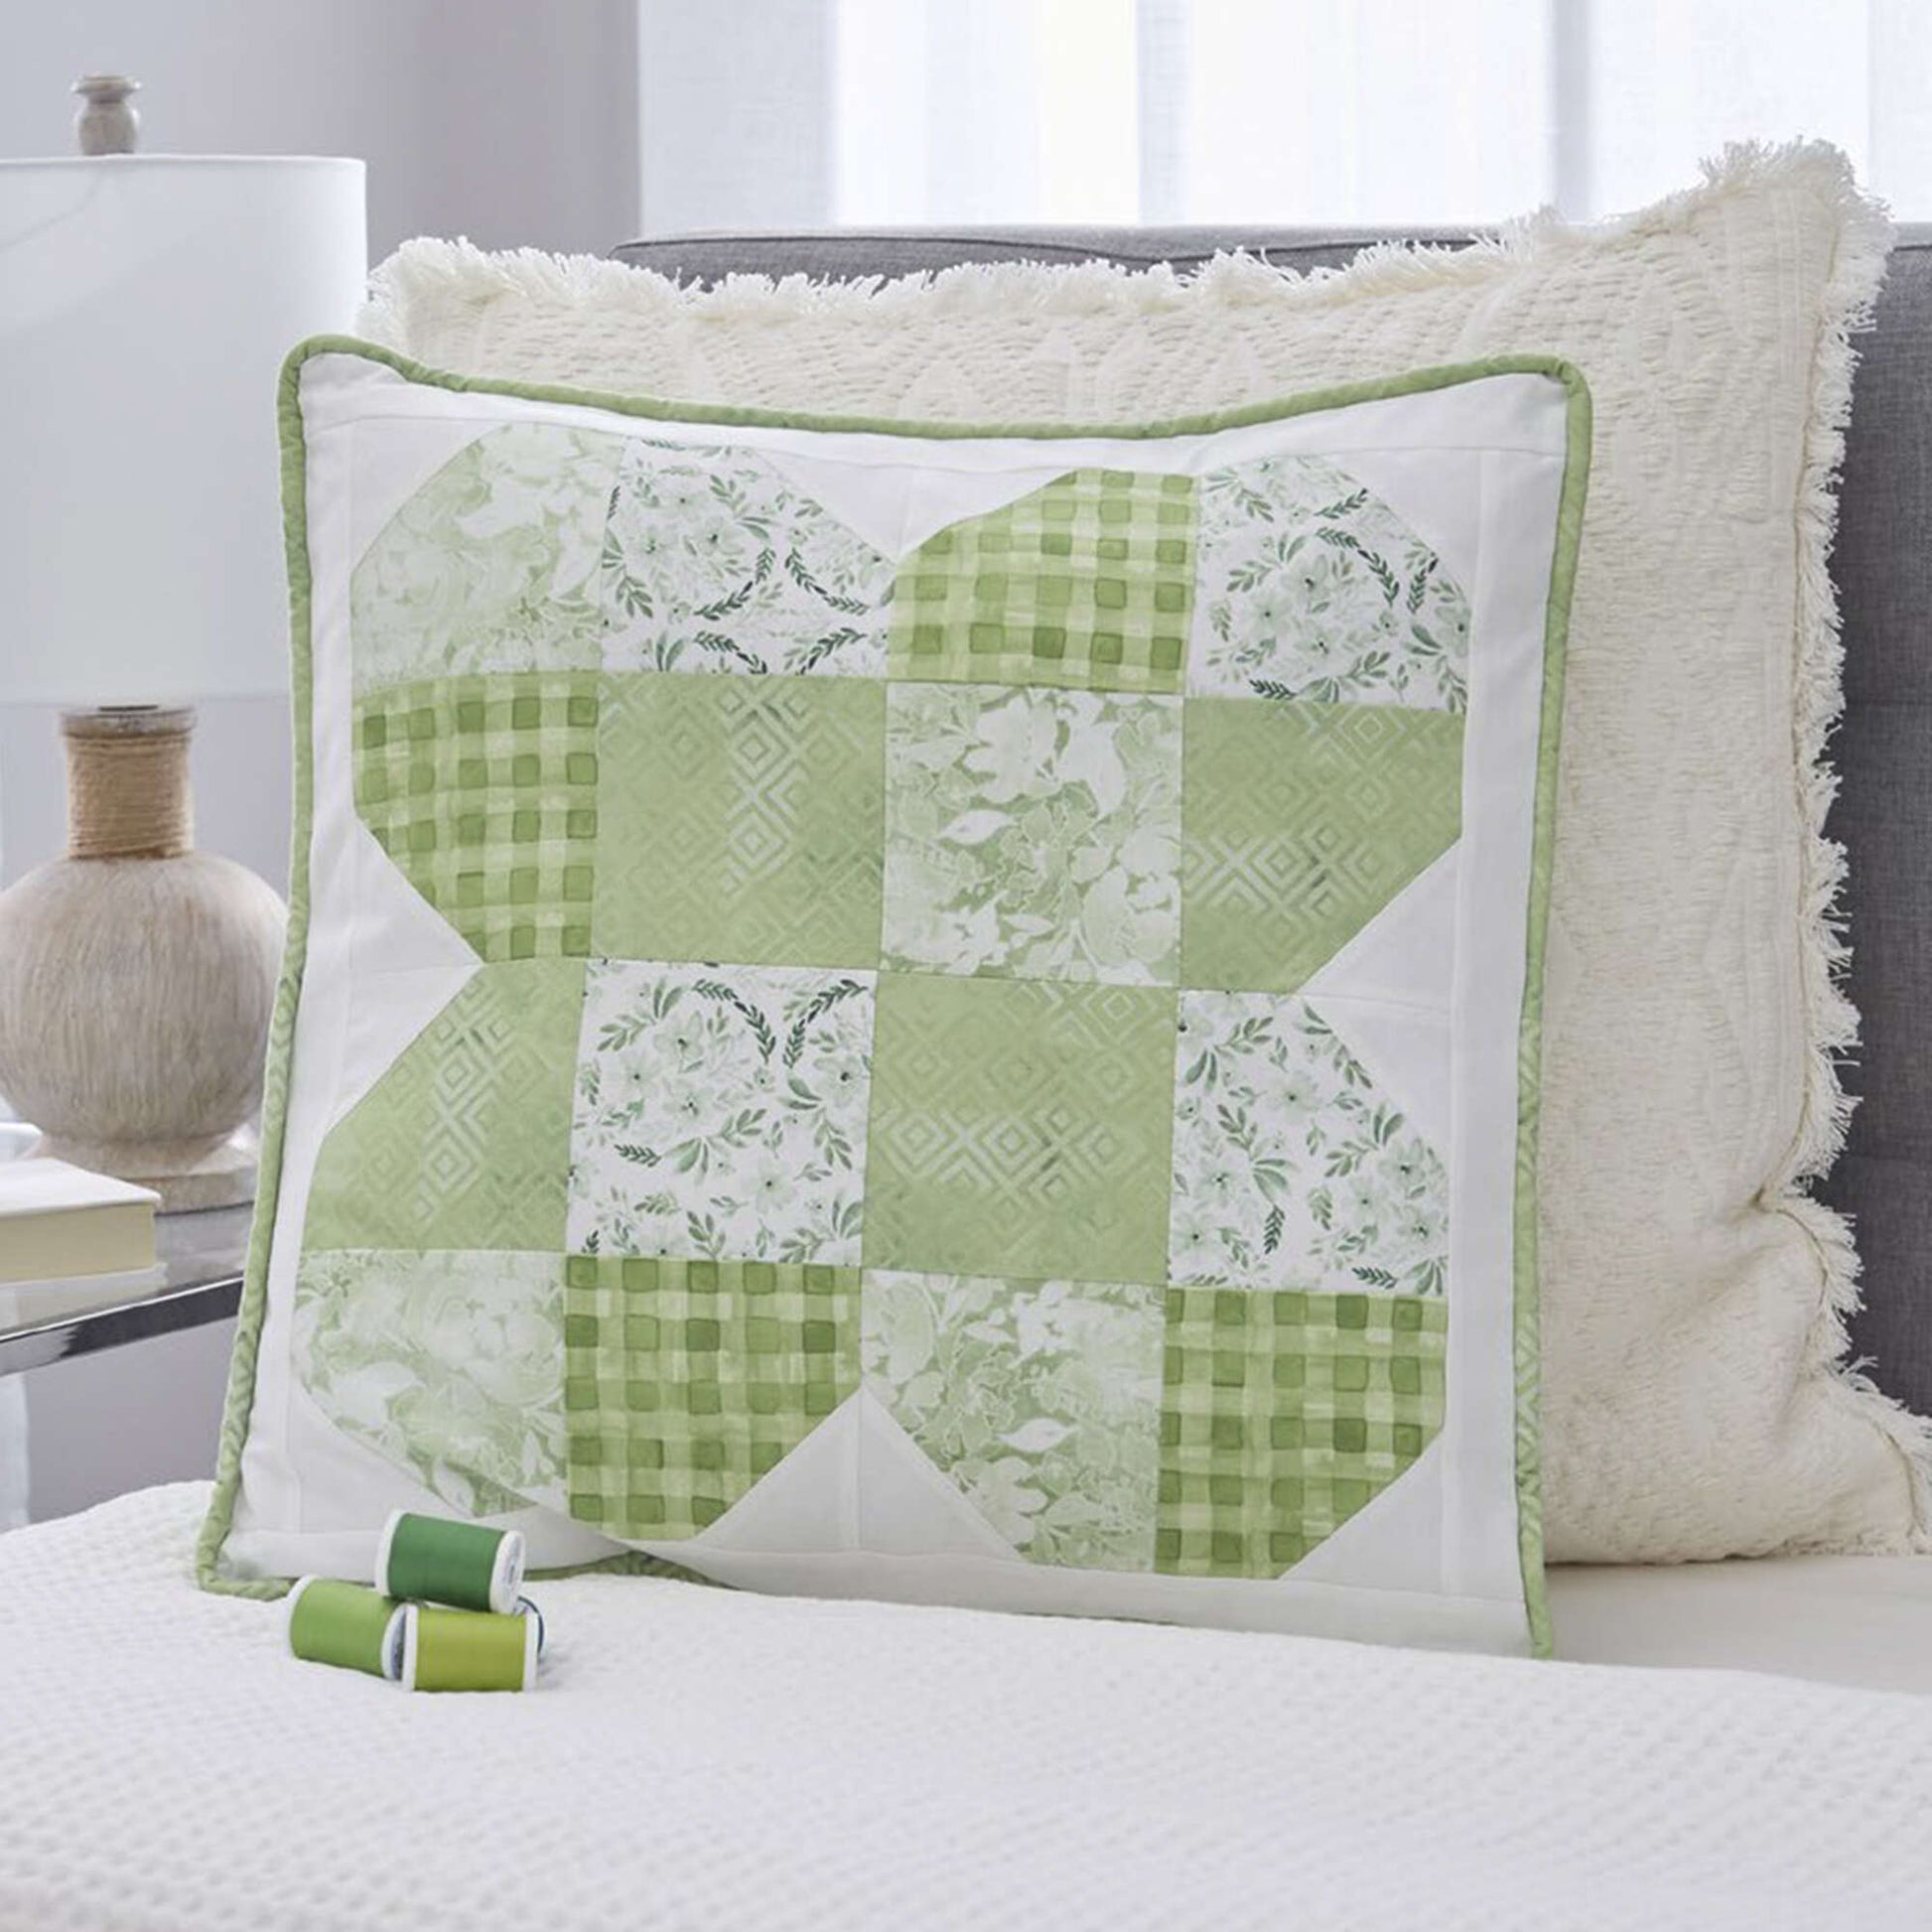 Free Coats & Clark Subtly Shamrock Patchwork Pillow Quilting Pattern